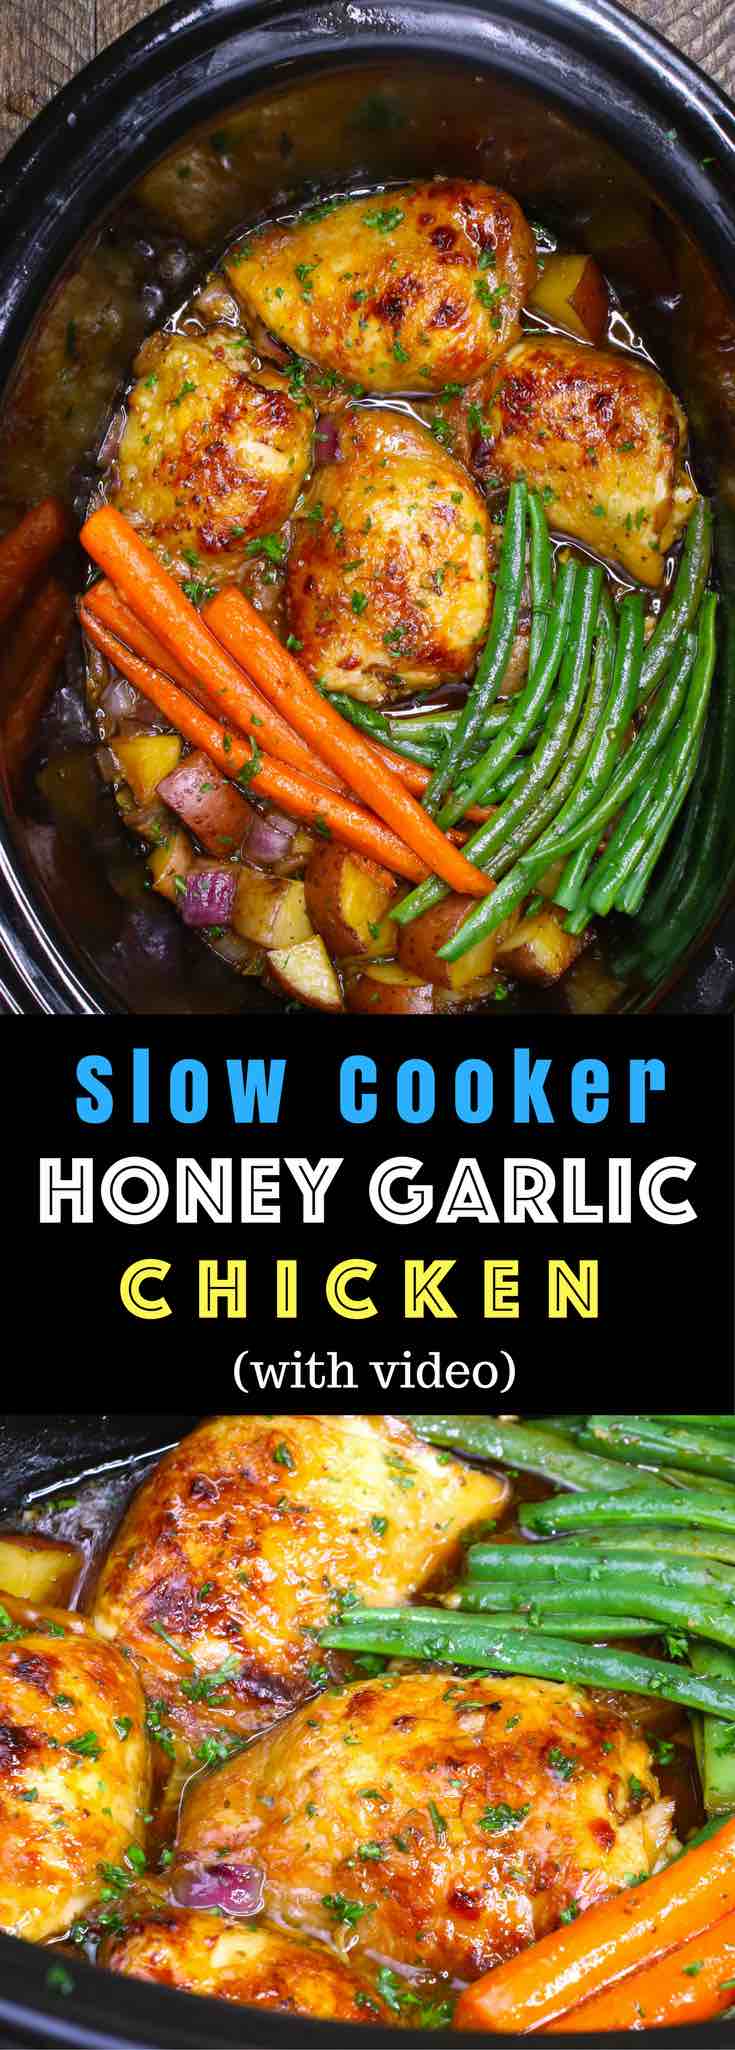 The easiest, most unbelievably delicious Slow Cooker Honey Garlic Chicken With Veggies. It’s one of my favorite crock pot recipes. Succulent chicken cooked in honey, garlic, soy sauce and mixed vegetables. Preparation is an easy 15 minutes. Easy one pot recipe. #slowcooker #crockpot #SlowCookerChicken #HoneyGarlicChicken 